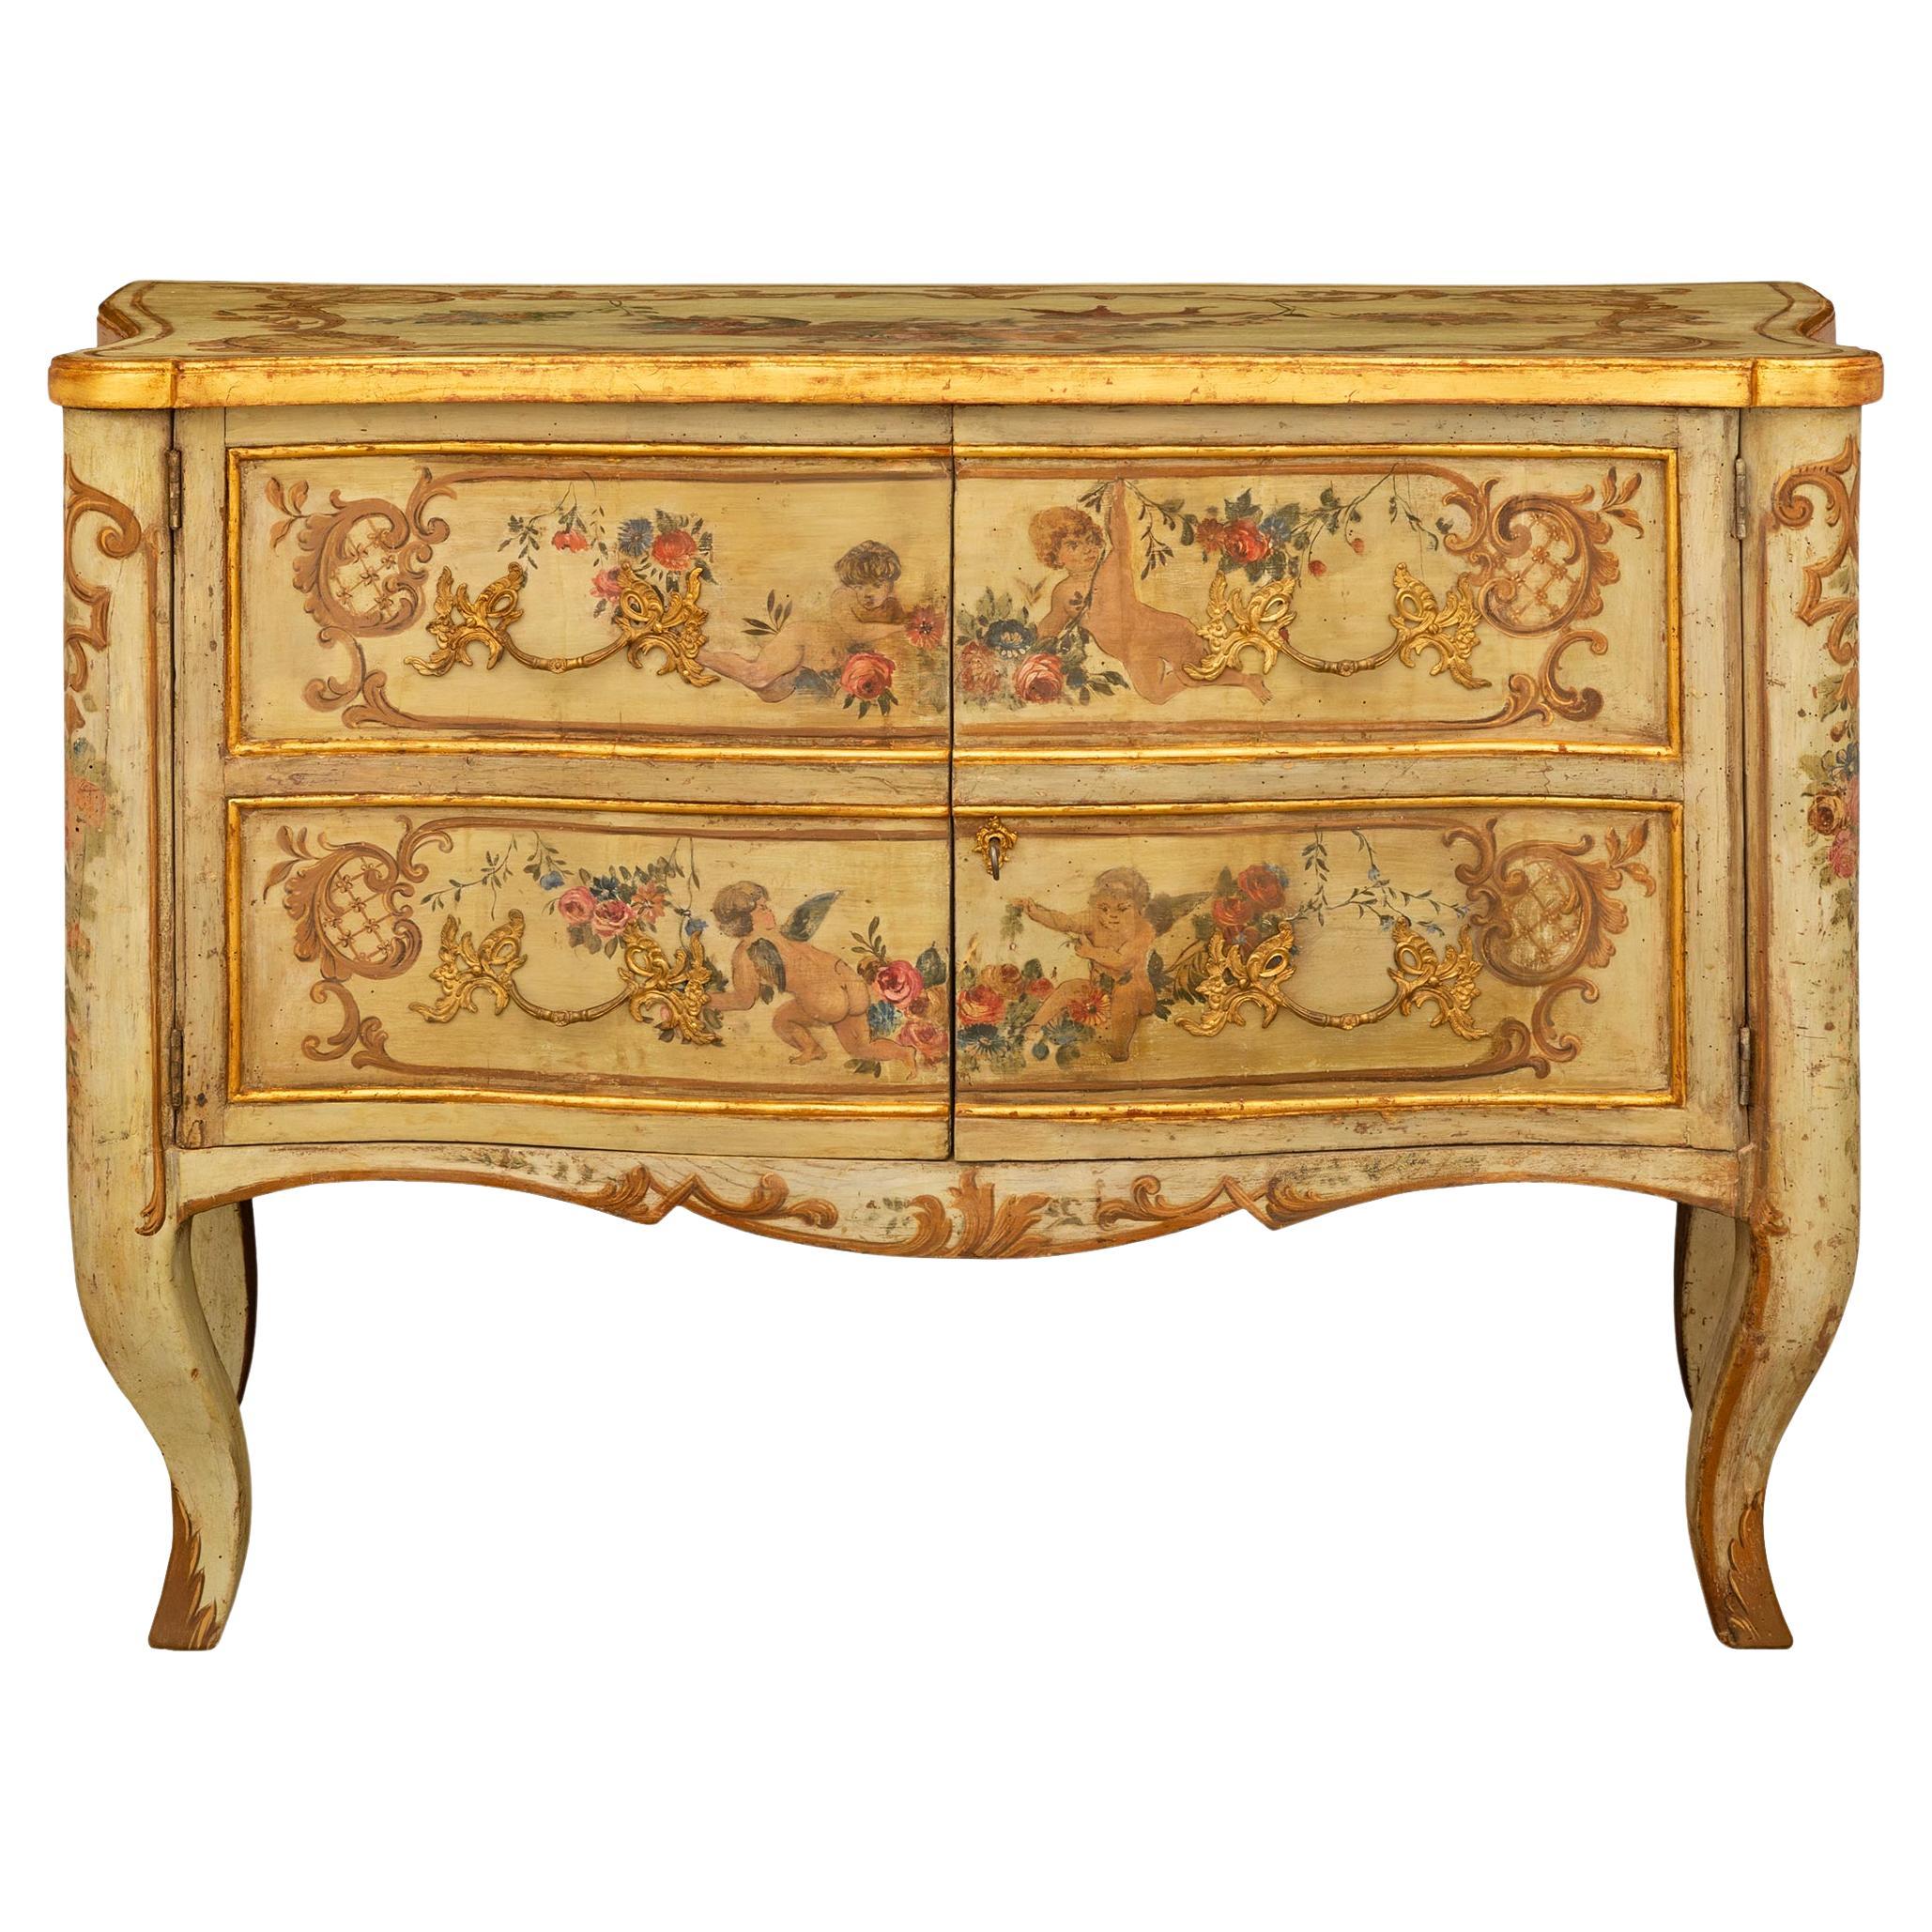 Italian 18th century Louis XV period Giltwood, Ormolu and patinated wood chest For Sale